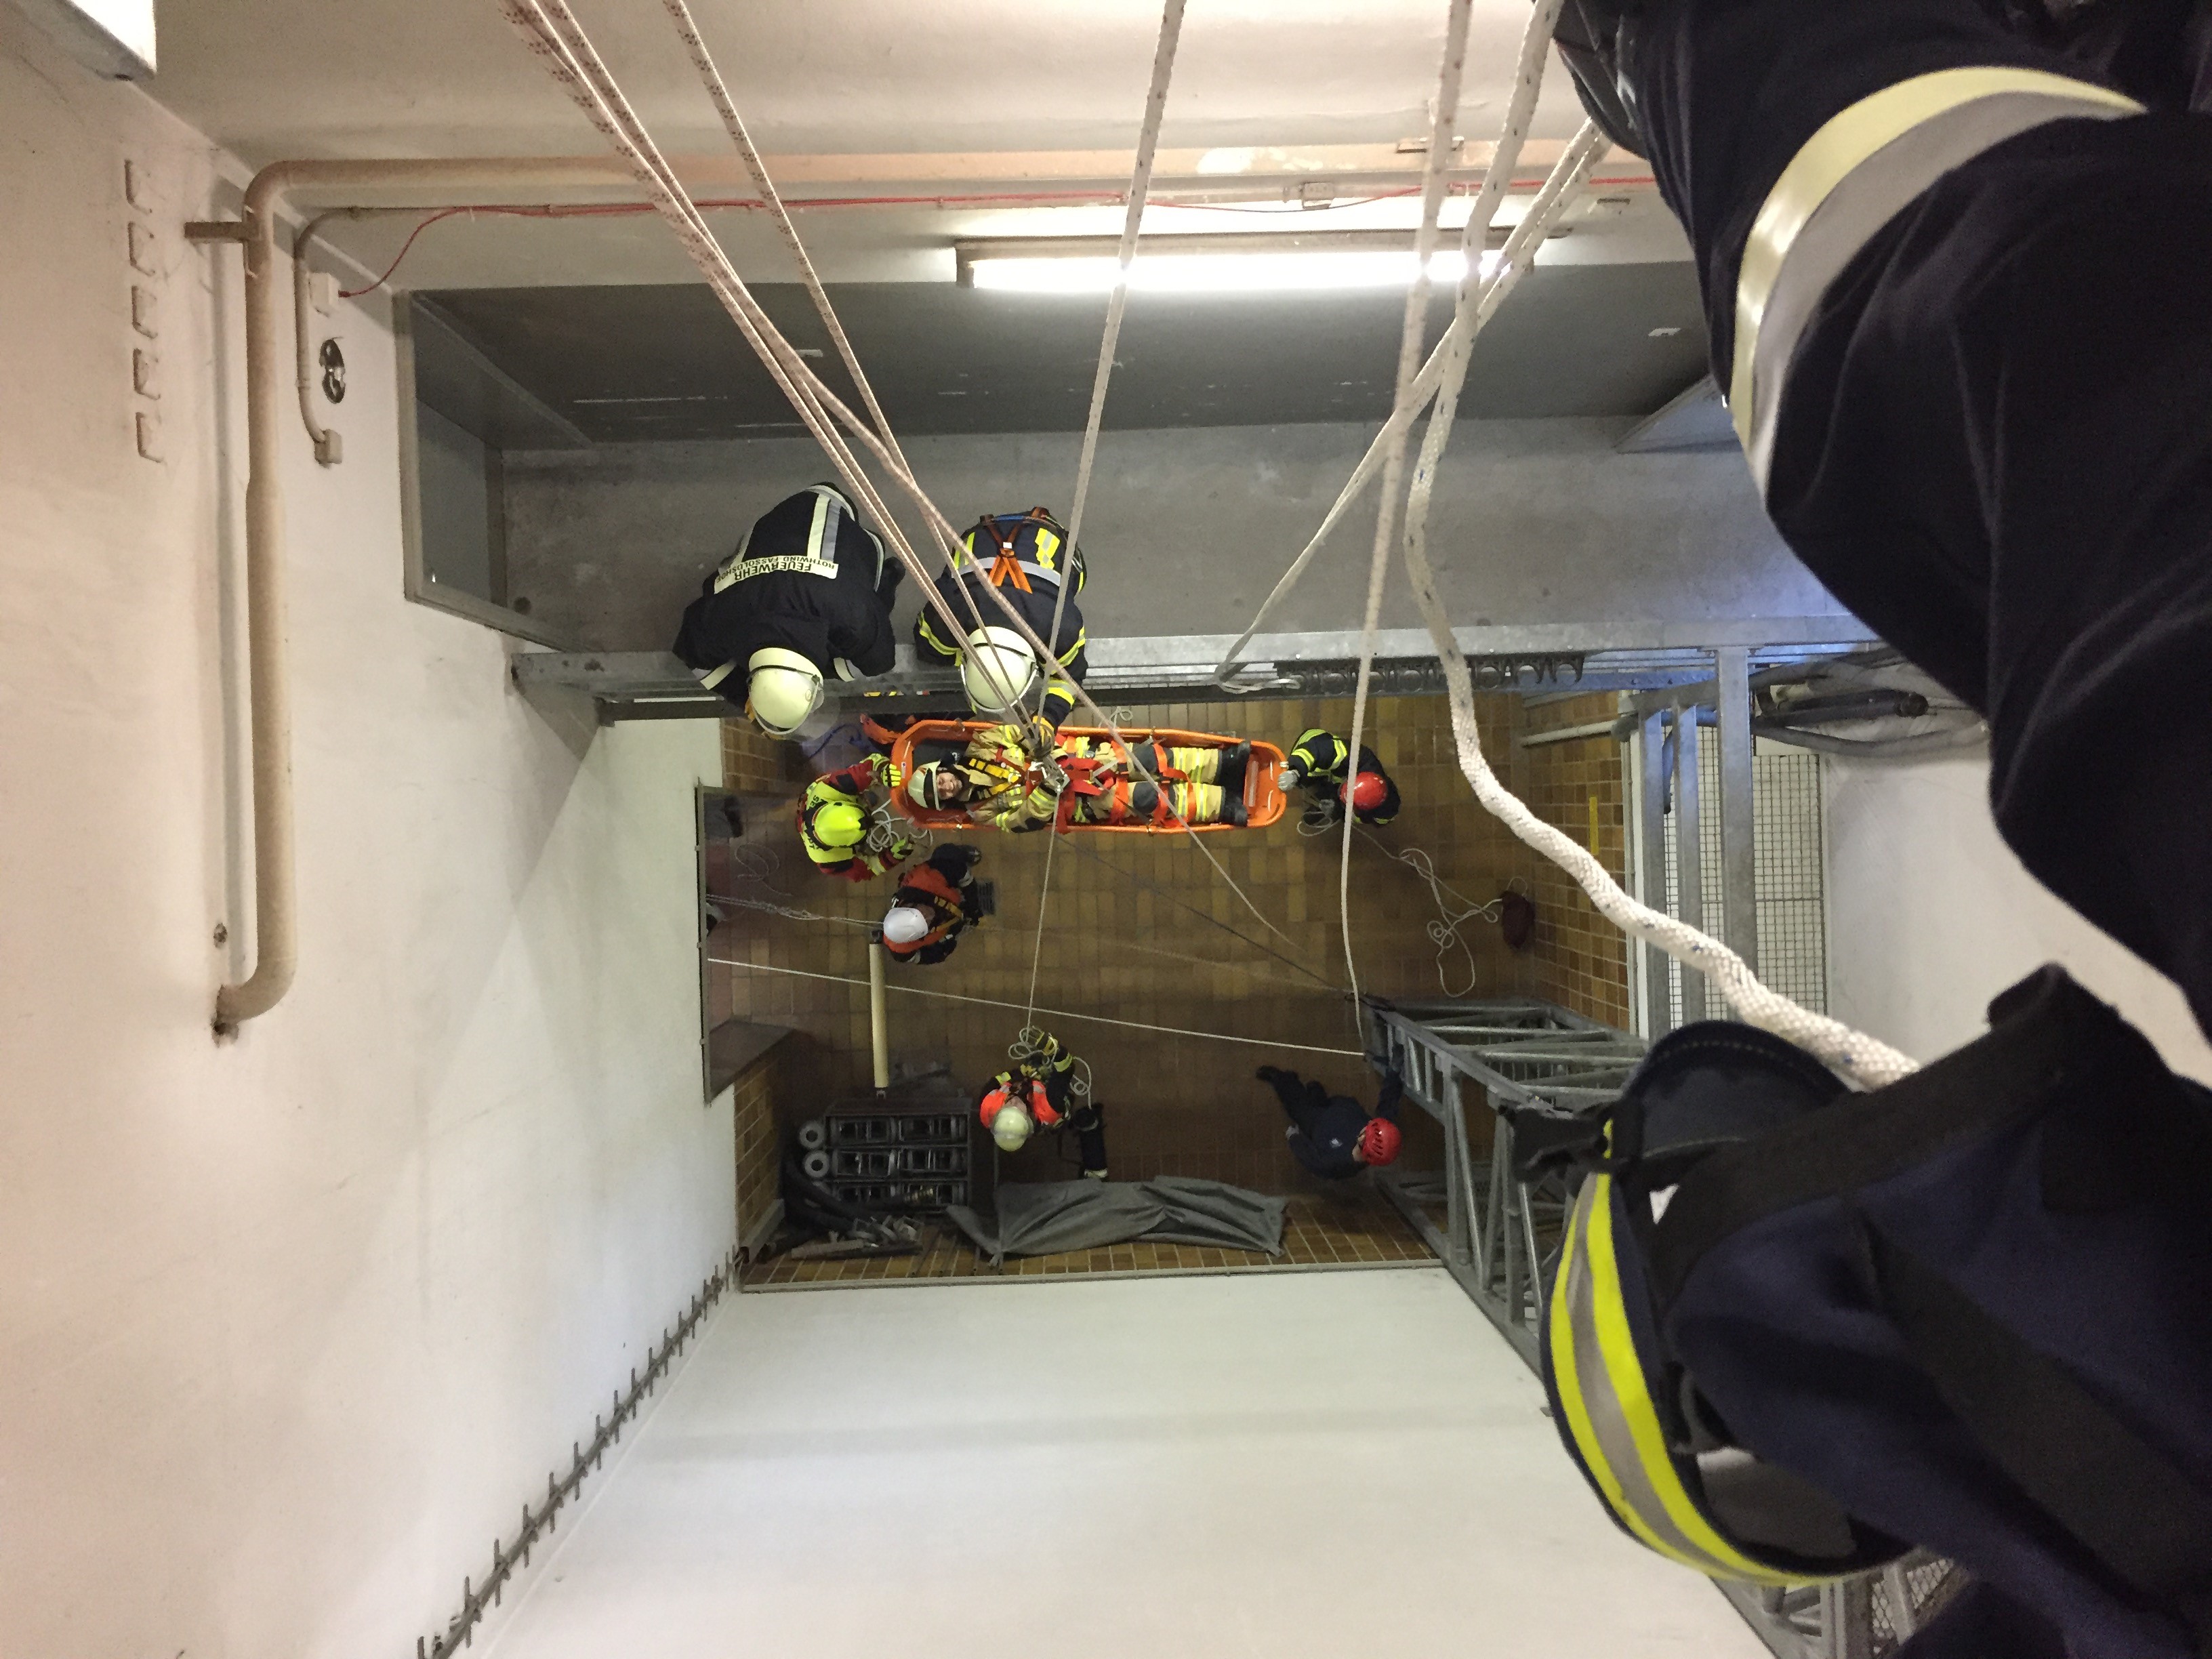 View from above into a shaft, on the floor of which a person has been placed in a stretcher, other people are busy lifting this stretcher upwards on ropes.